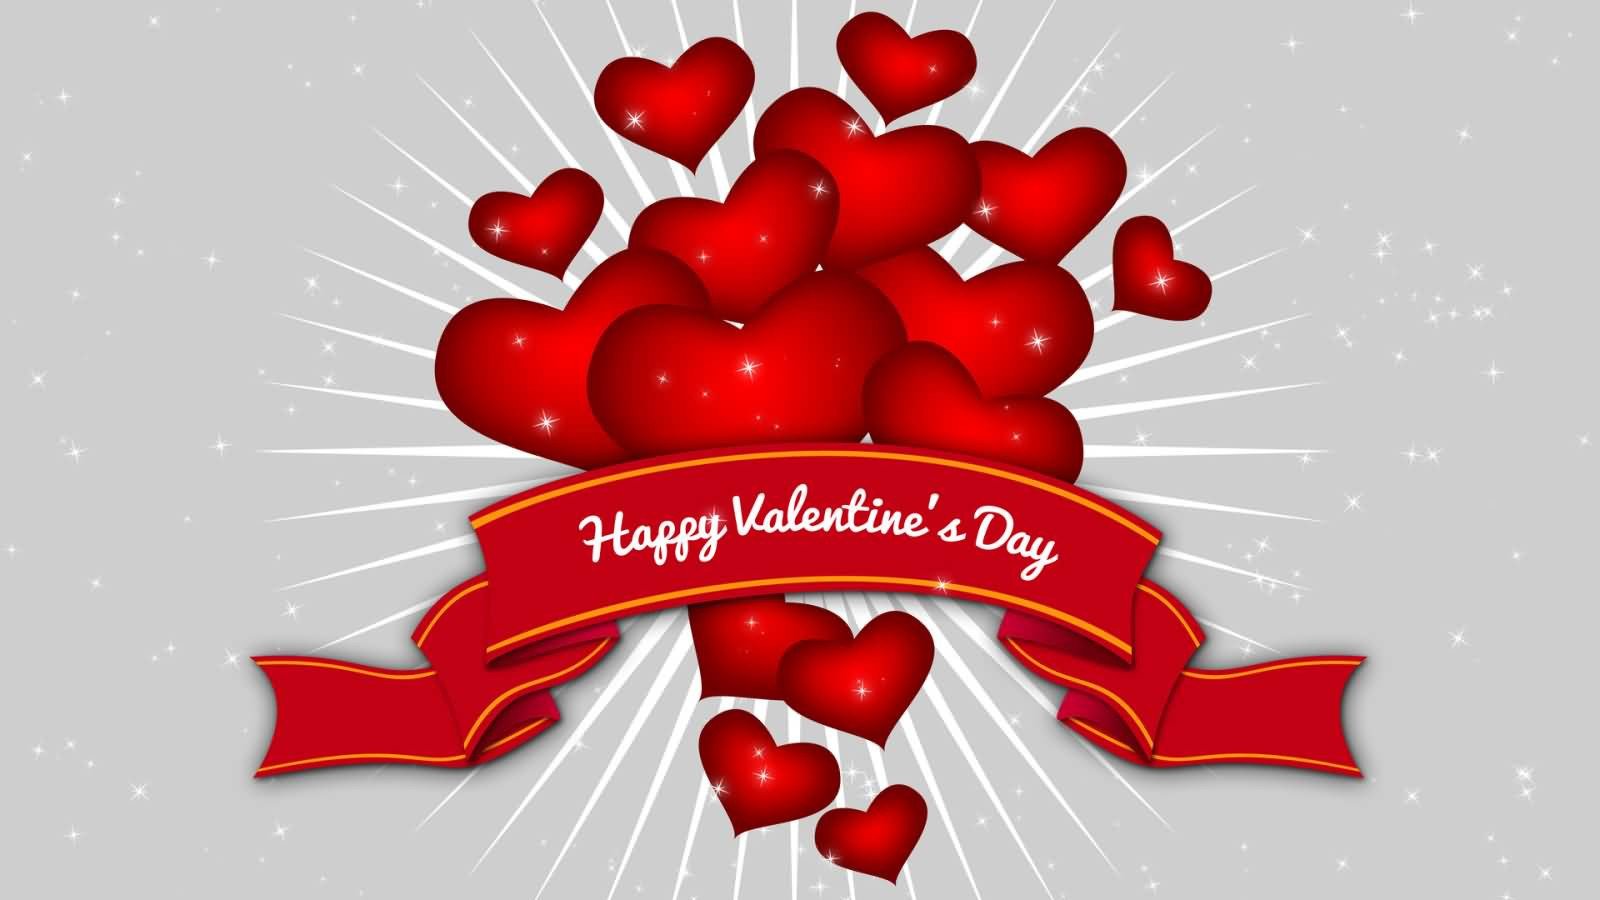 Happy Valentines Day Wallpaper 70 Most Beautiful Happy Valentine’s Day Greeting